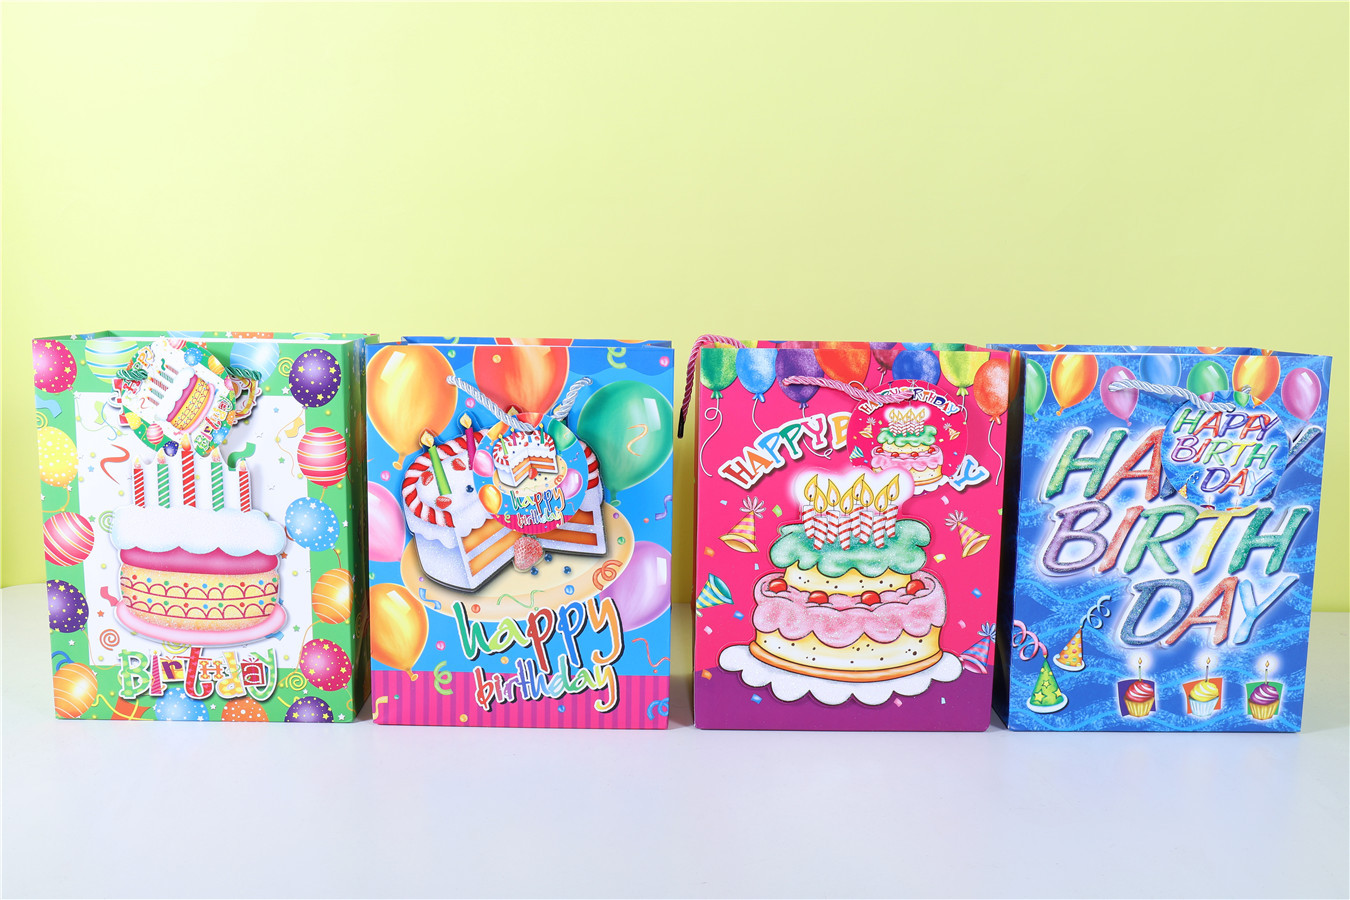 Foreign Trade Patch Dusting Powder Birthday Gift Bag Cake Series Gift Bag